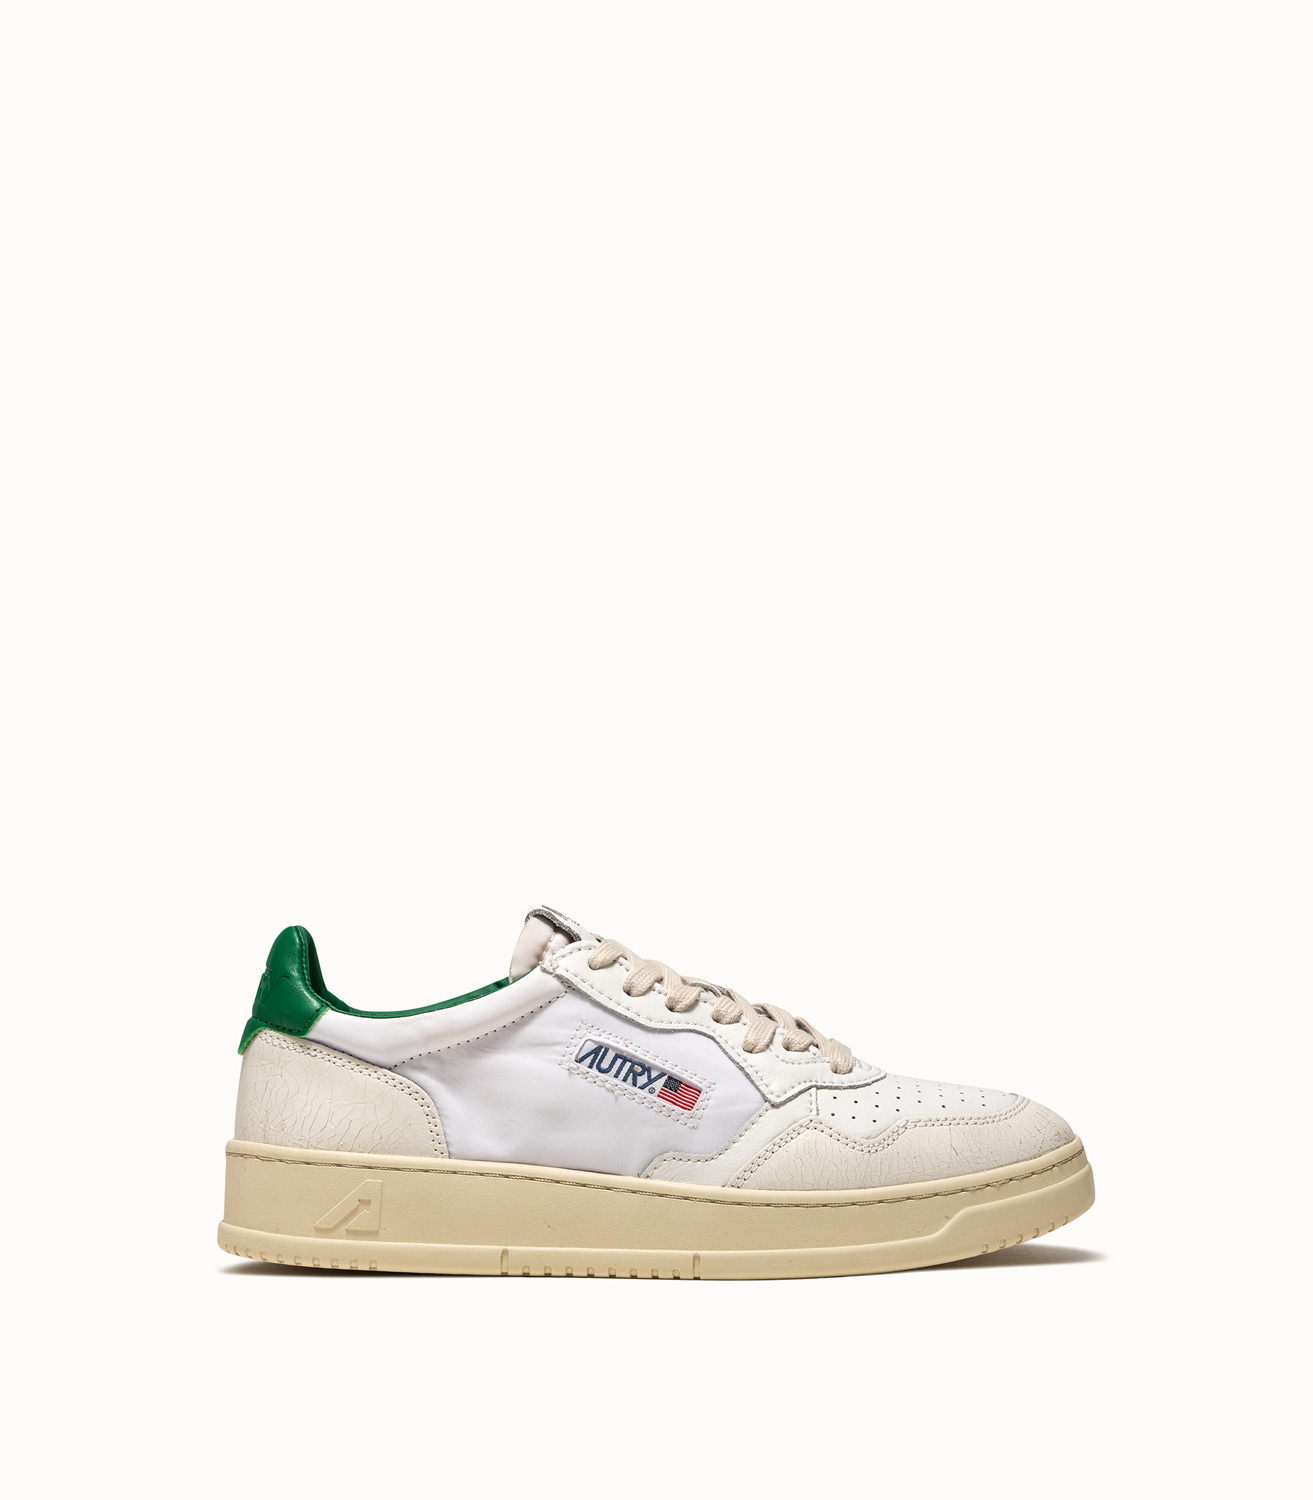 white and green sneakers